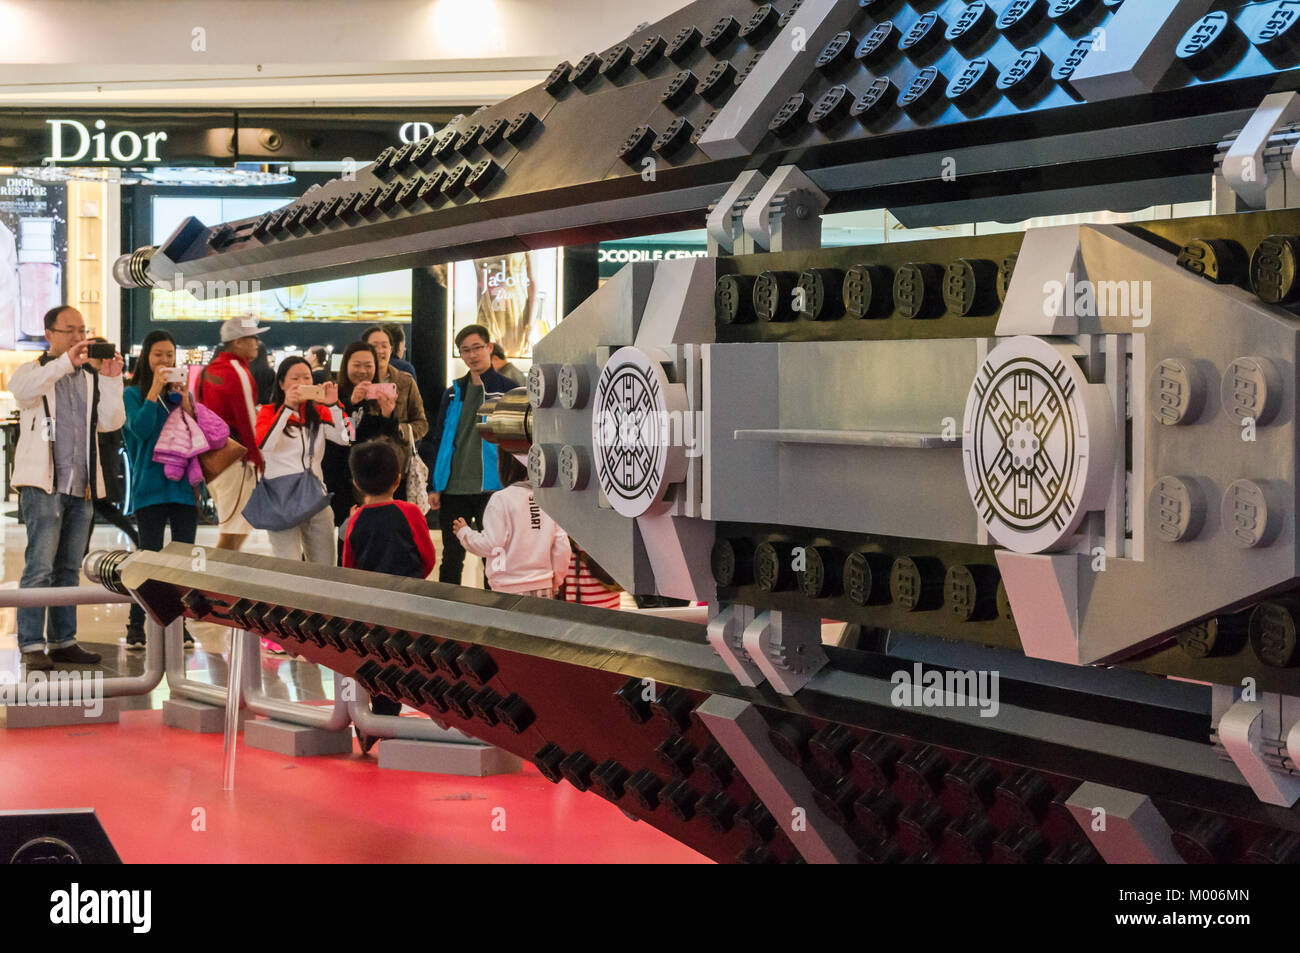 Lego exhibit and people posing for photos in Hong Kong SAR Stock Photo